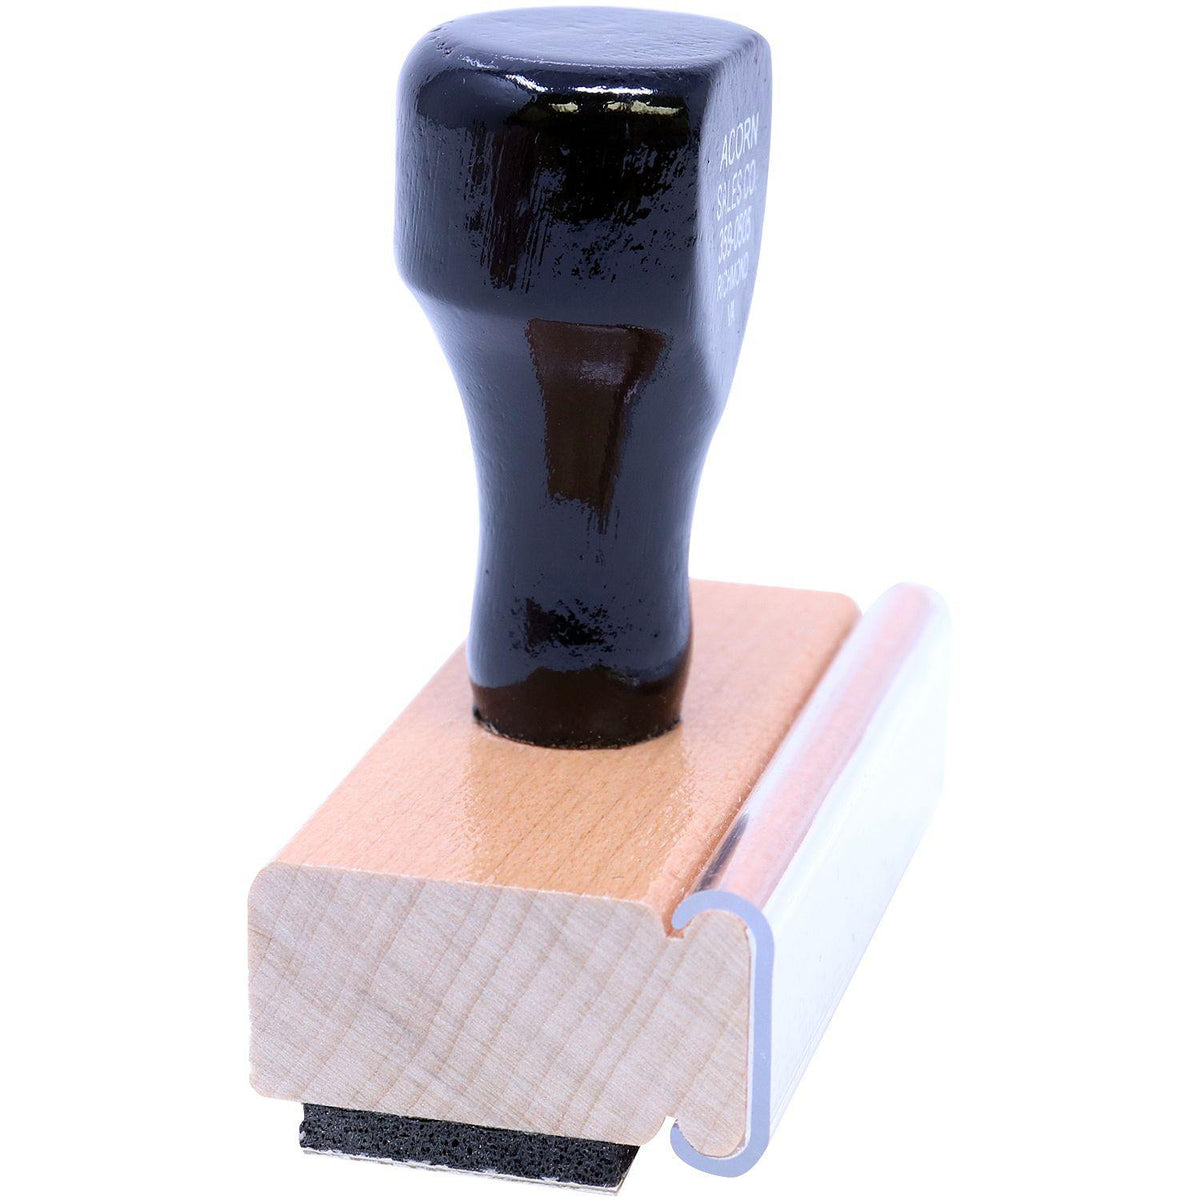 Side View of Exhibit Rubber Stamp at an Angle